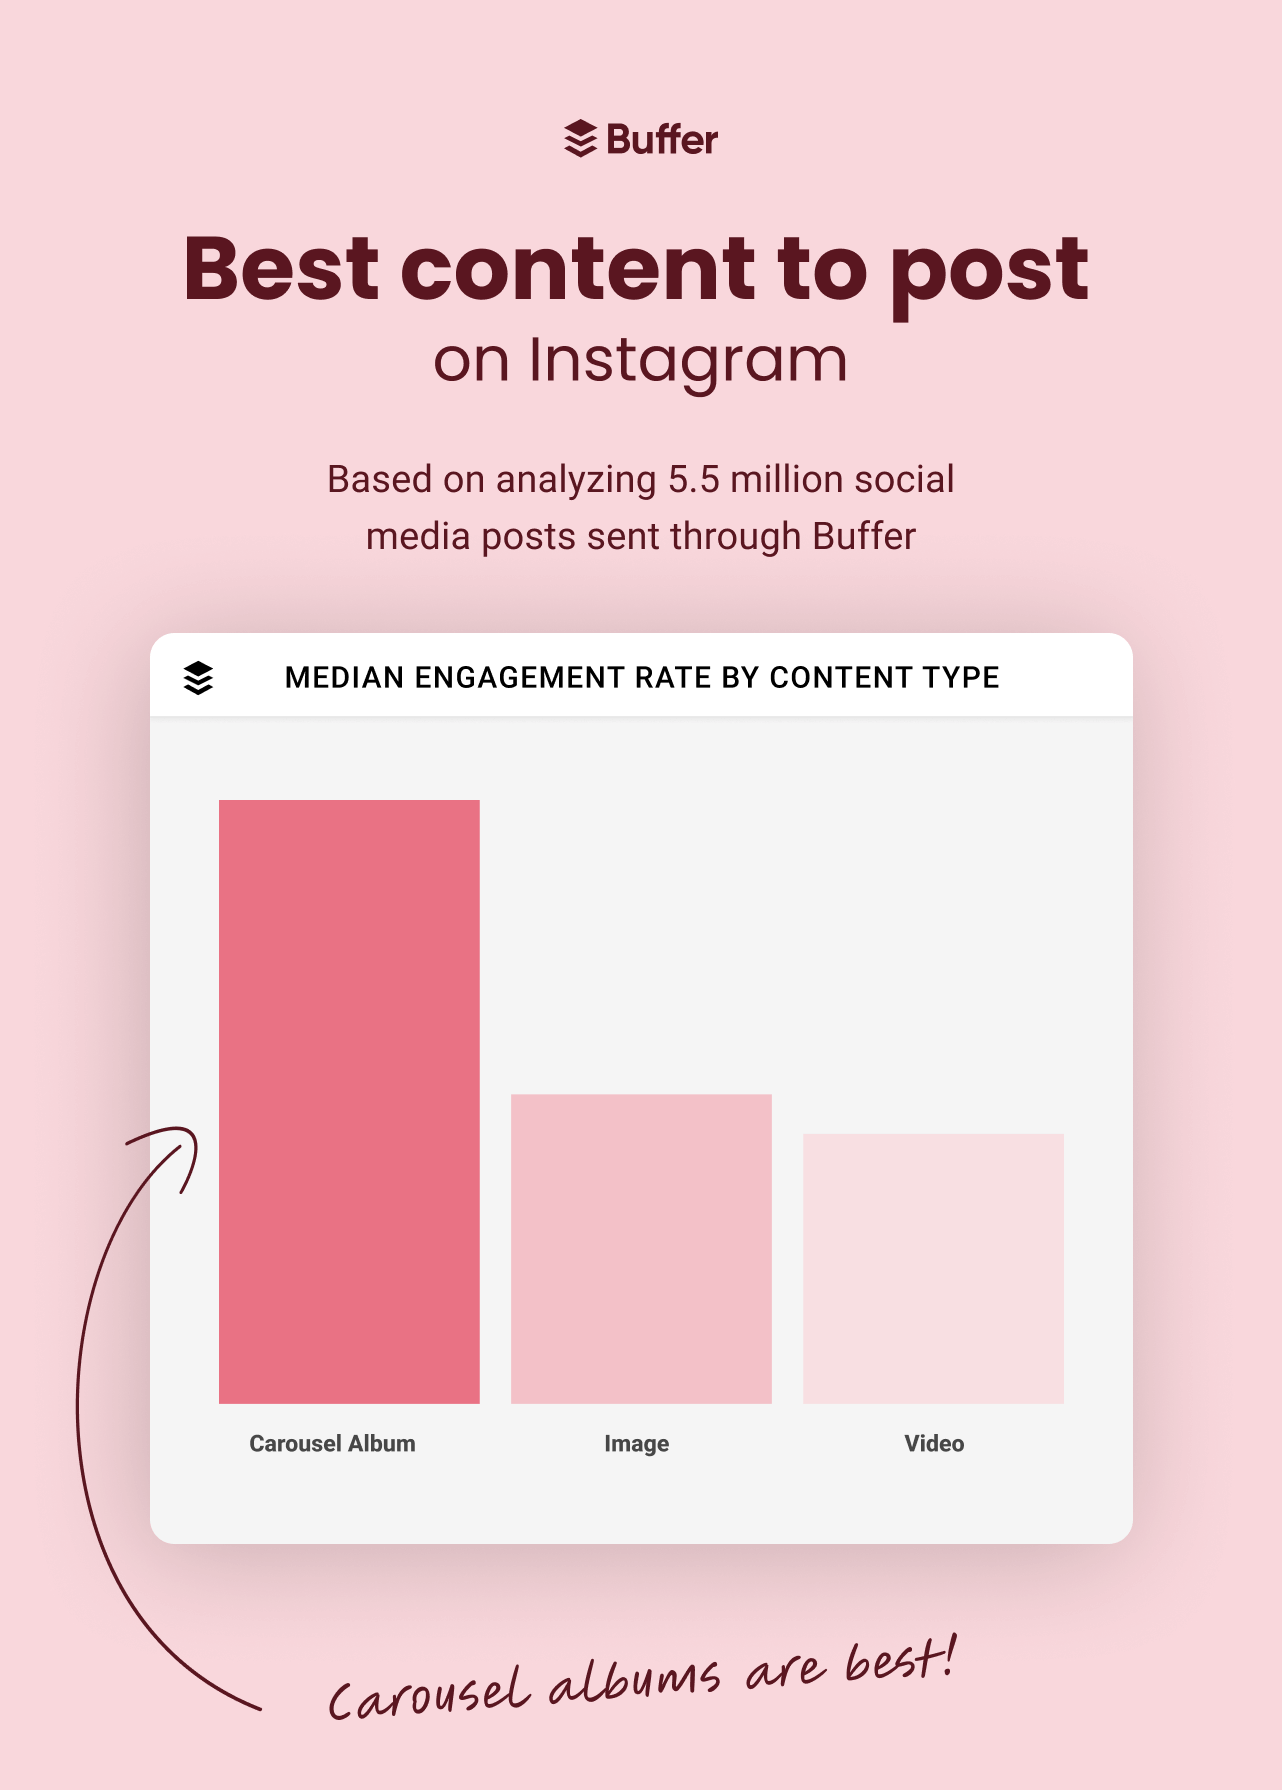 A graph analyzing data from Buffer shows that carousels are the best content type for engagement on Instagram.